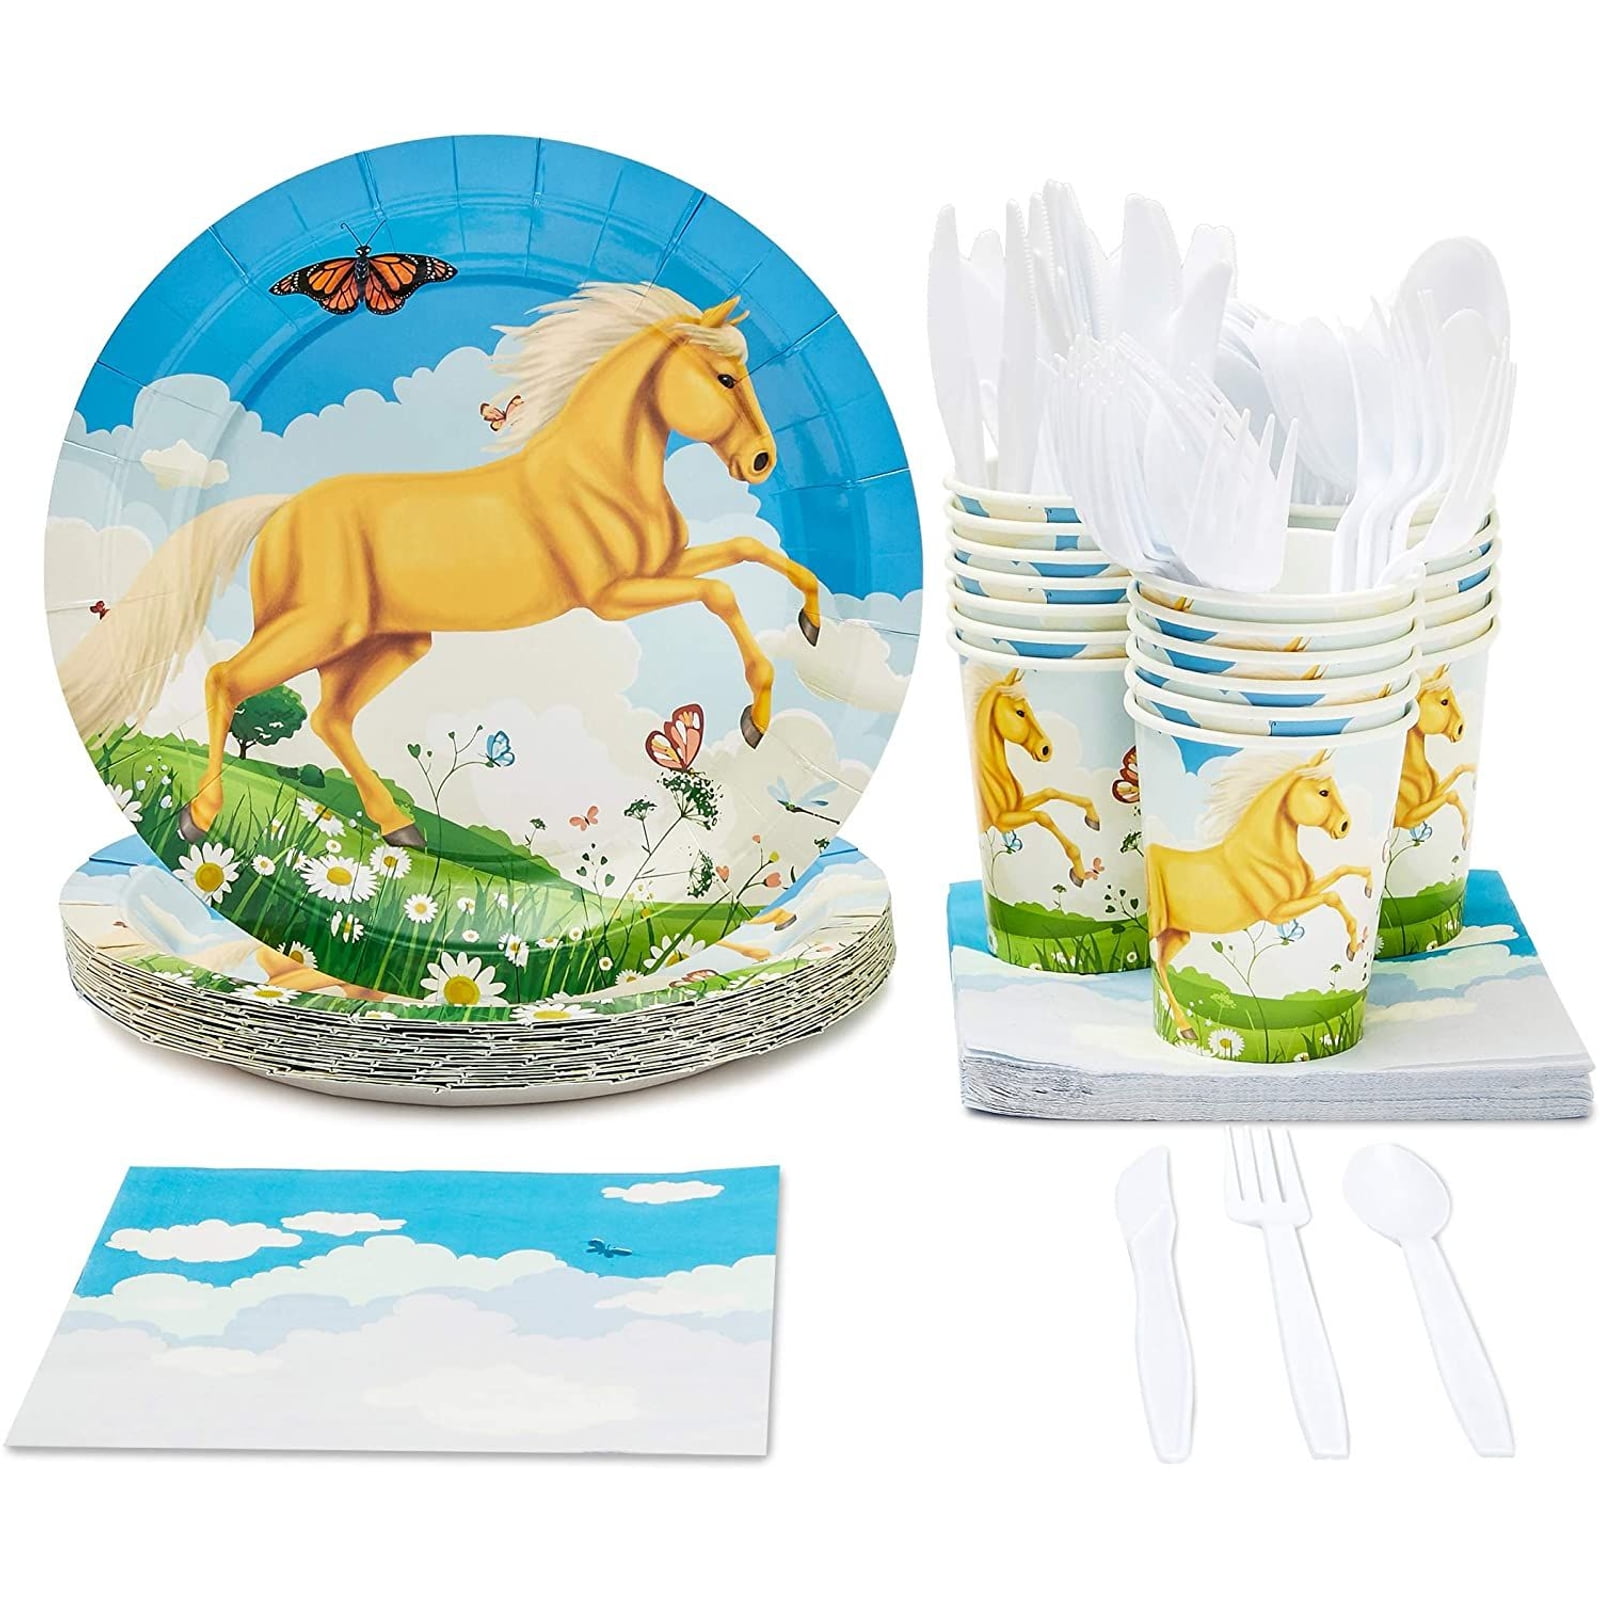 Lunch Napkin Happy Birthday Banner Table Cover Candles and Recipe Cake Plates Horse Equine Happy Birthday Disposable Paper Party Supplies Serves 16 Dinner Plates Beverage 